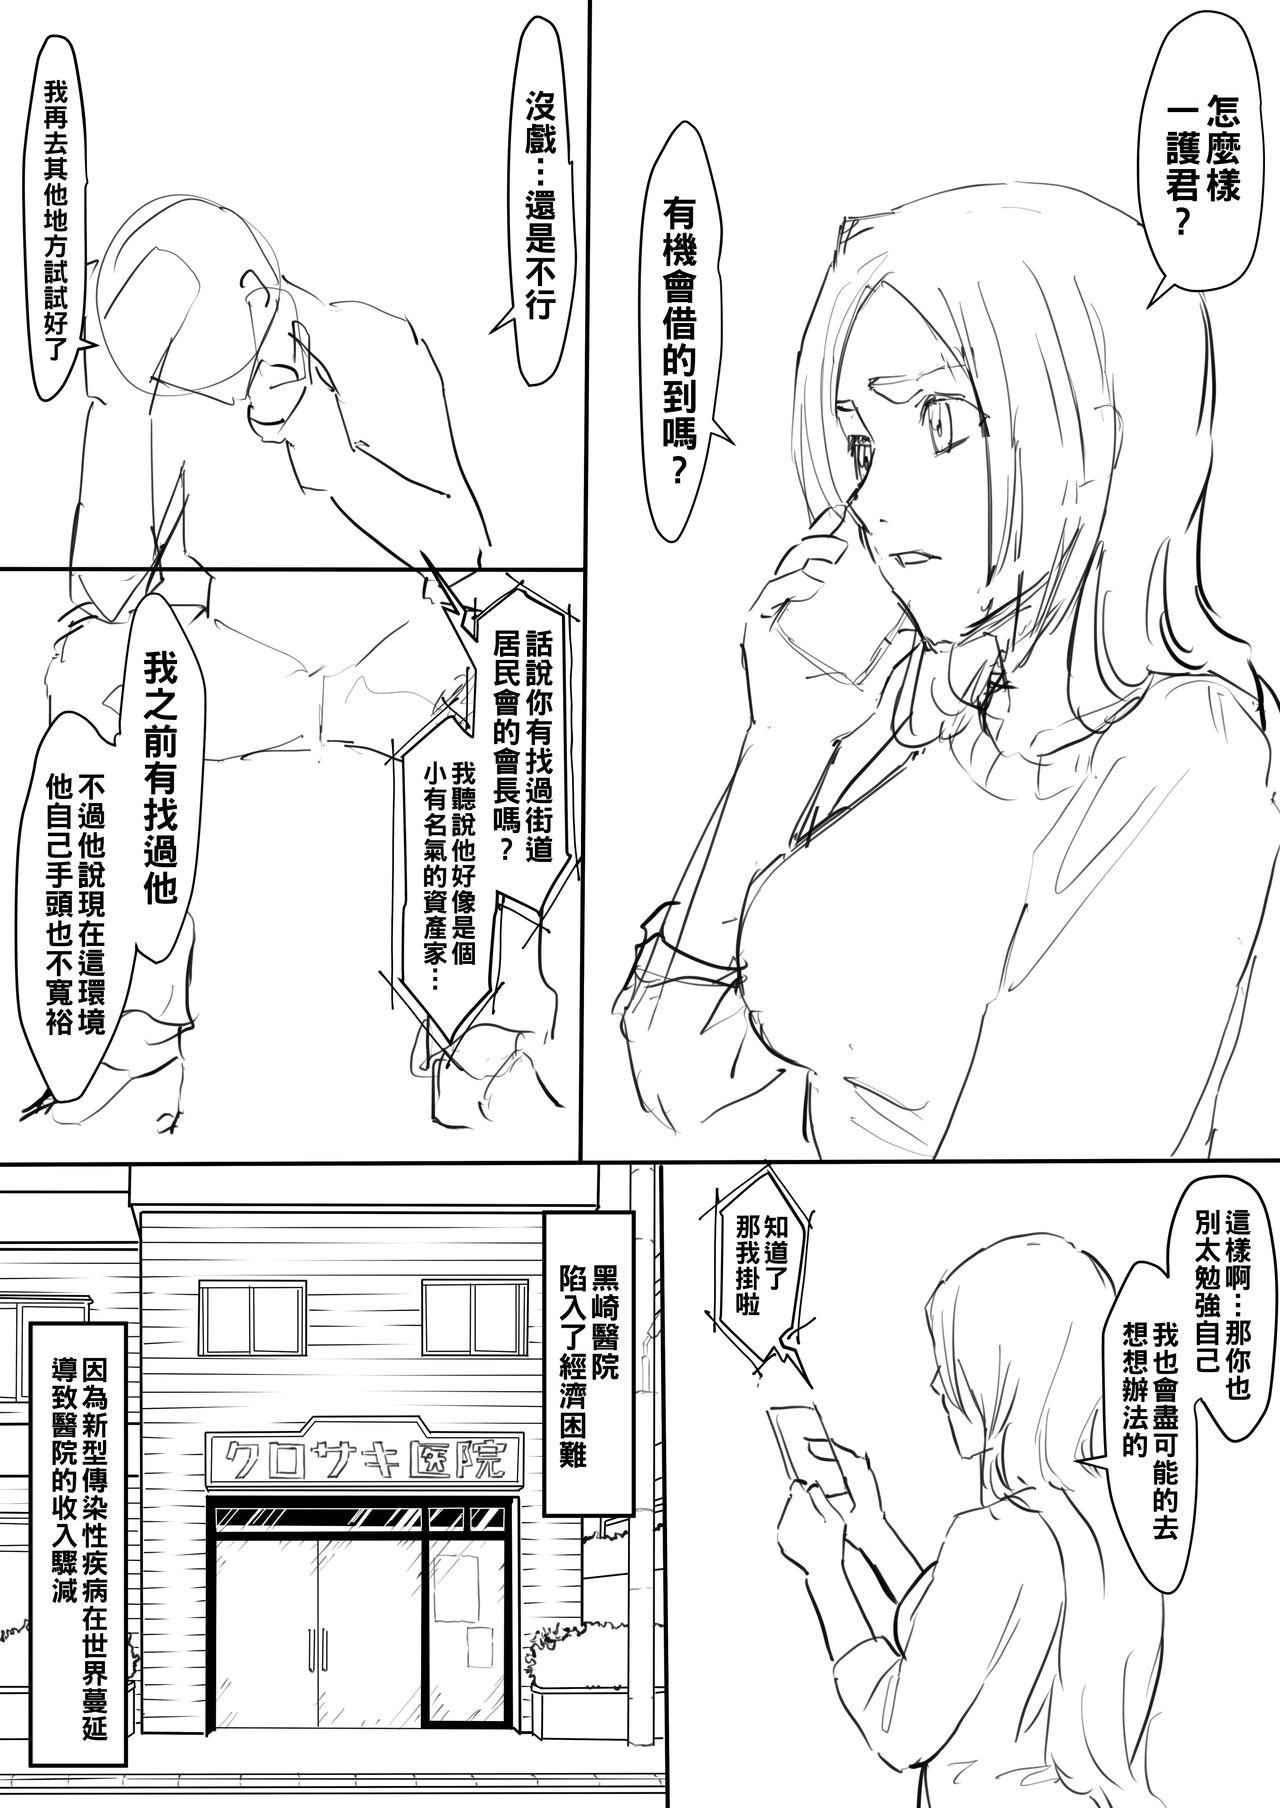 Duro Orihime Manga - Bleach Parties - Picture 1